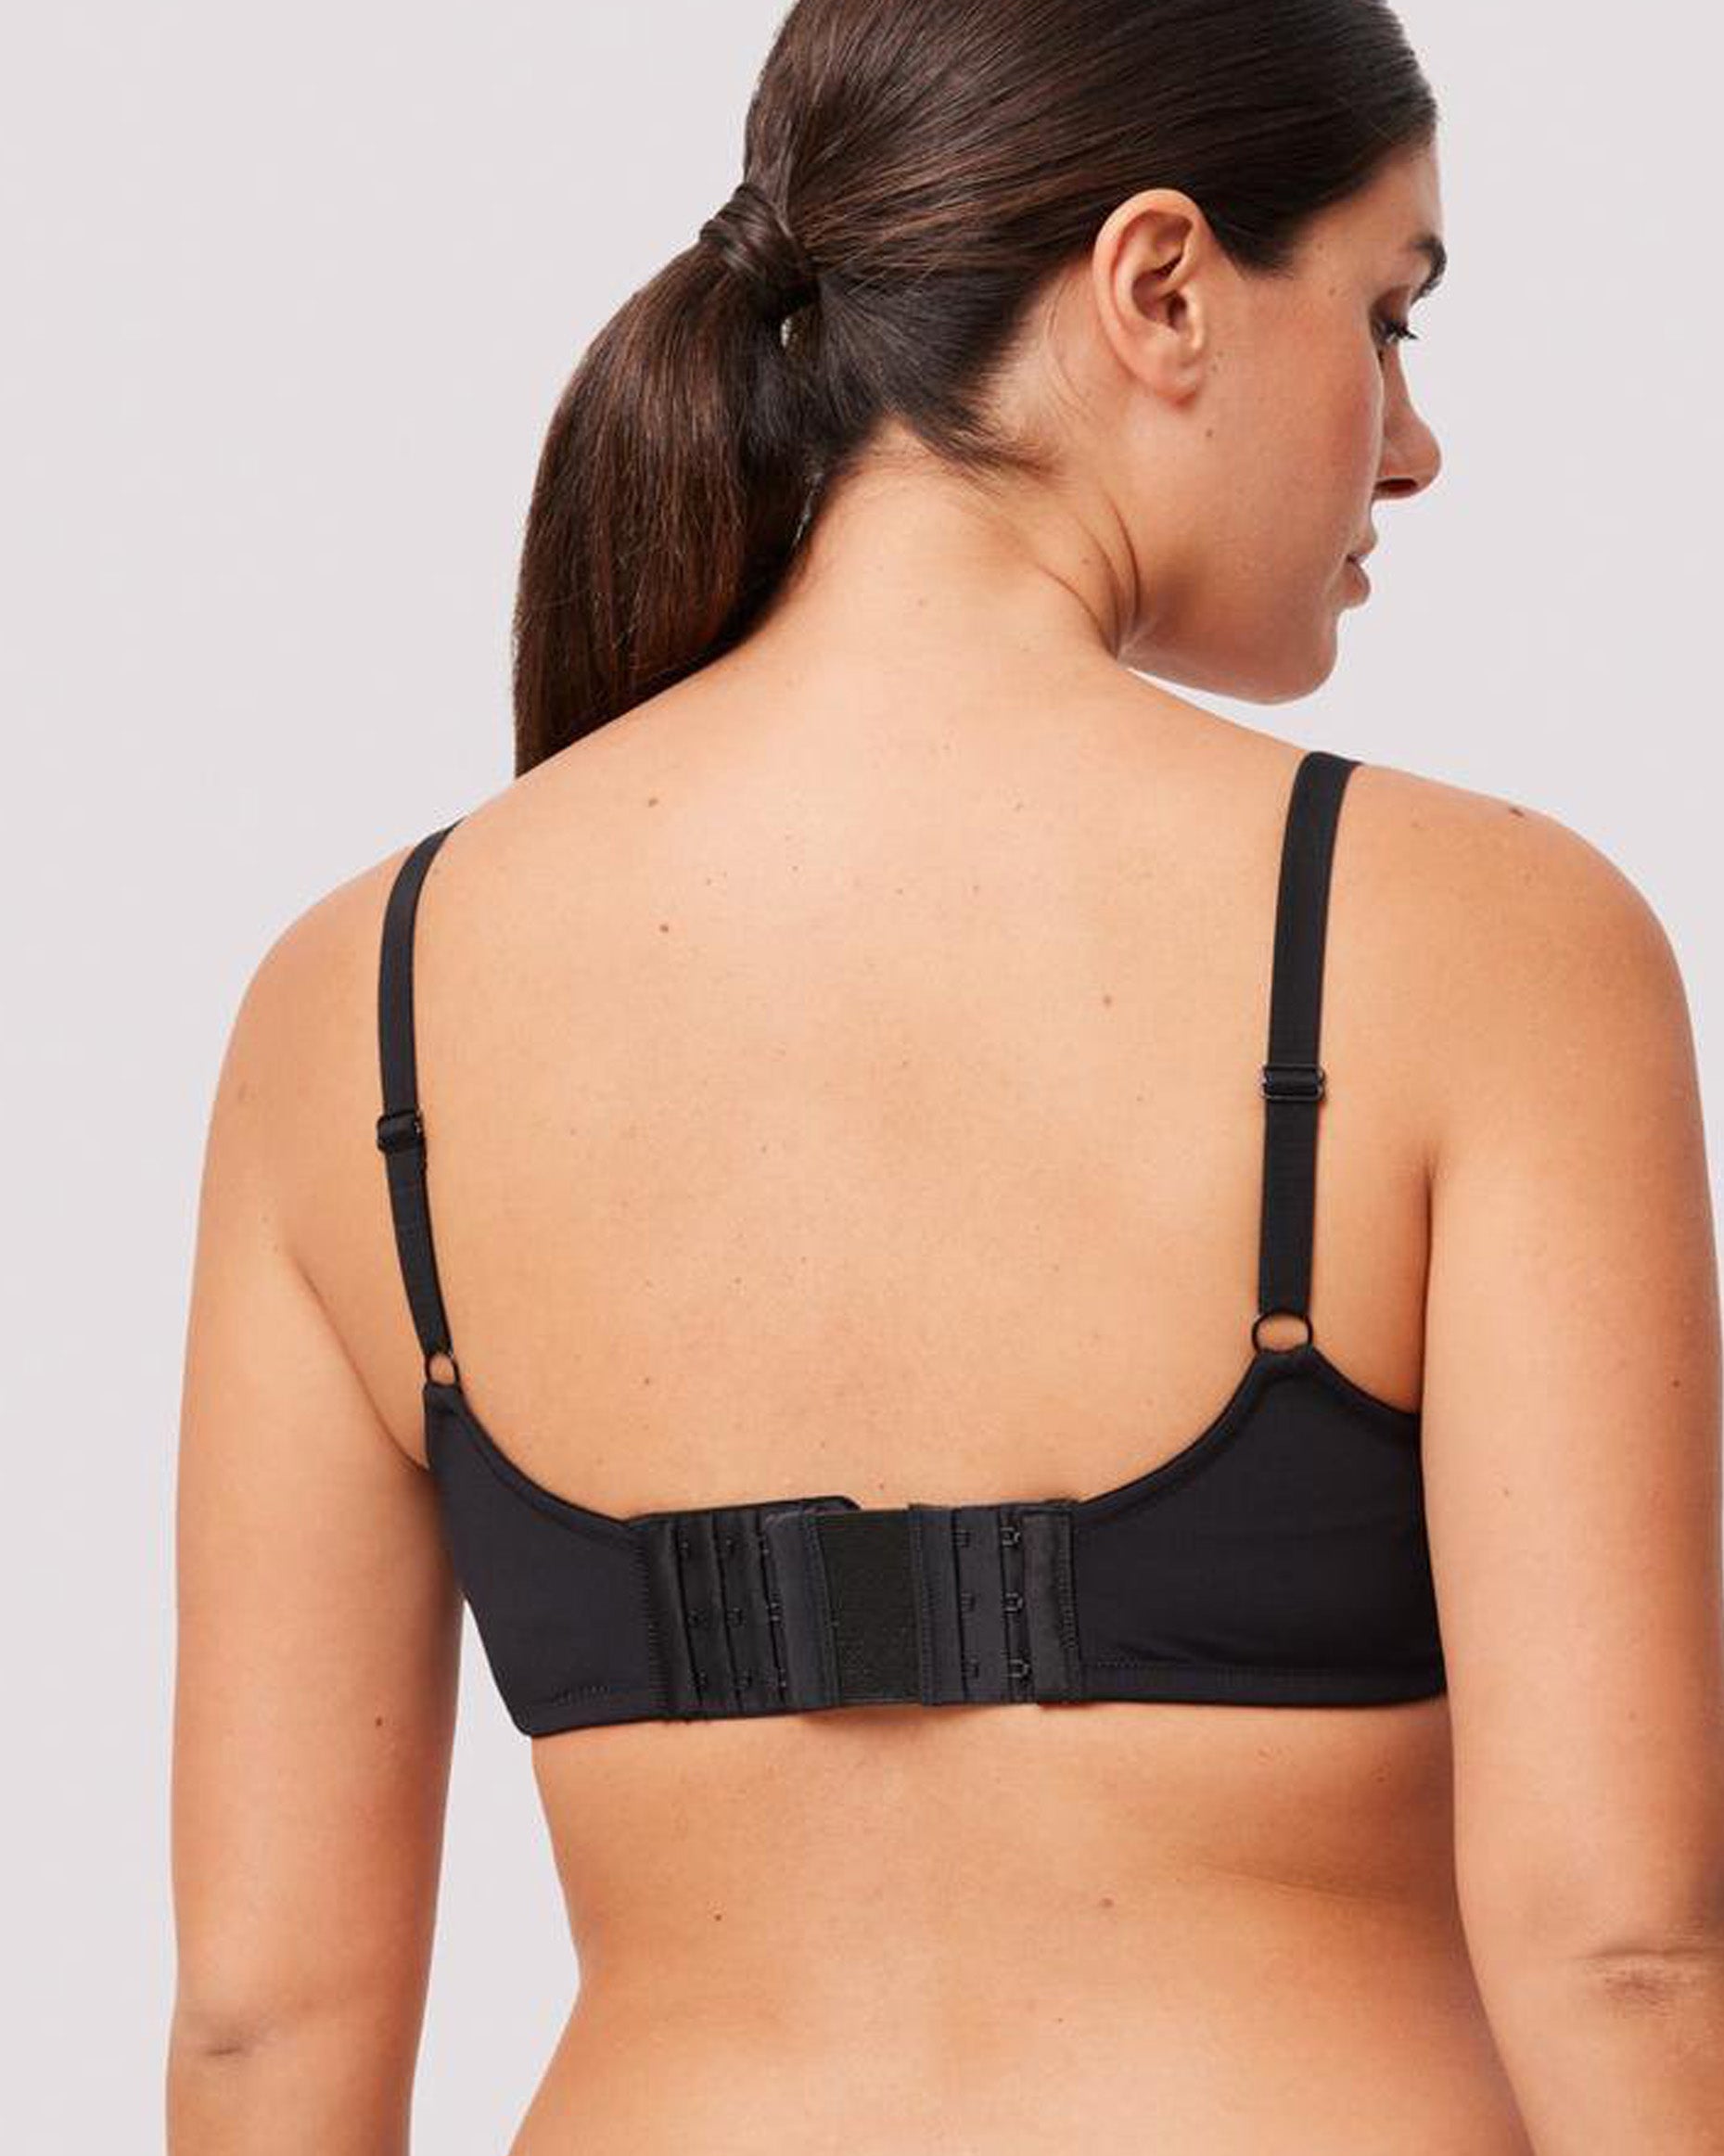 Ysabel Mora 10143 Bra Extender - 3 bra closure extenders with elastic in black. They fit the basic 3 rows of hook-and-eye closures, providing 3 more closing positions so that your bra fits the way you like it.